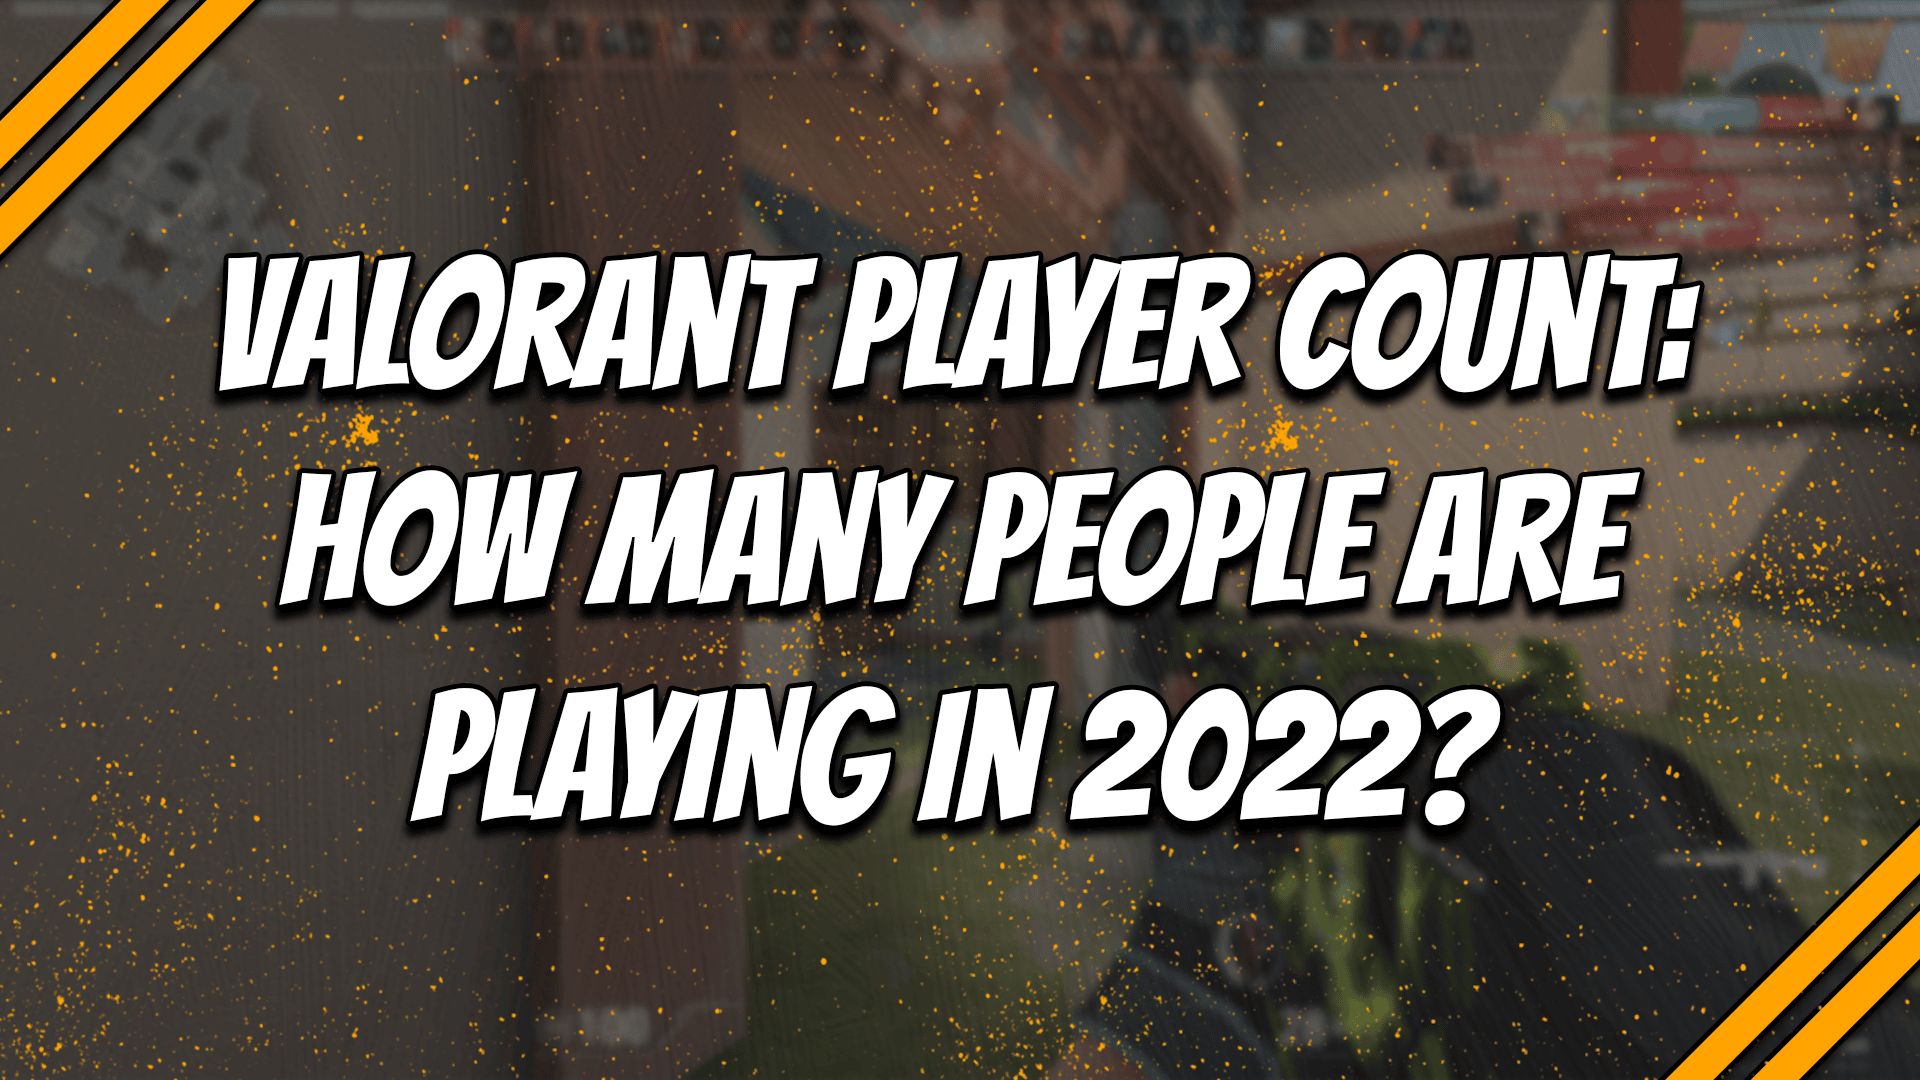 Valorant player count, how many people are playing in 2022